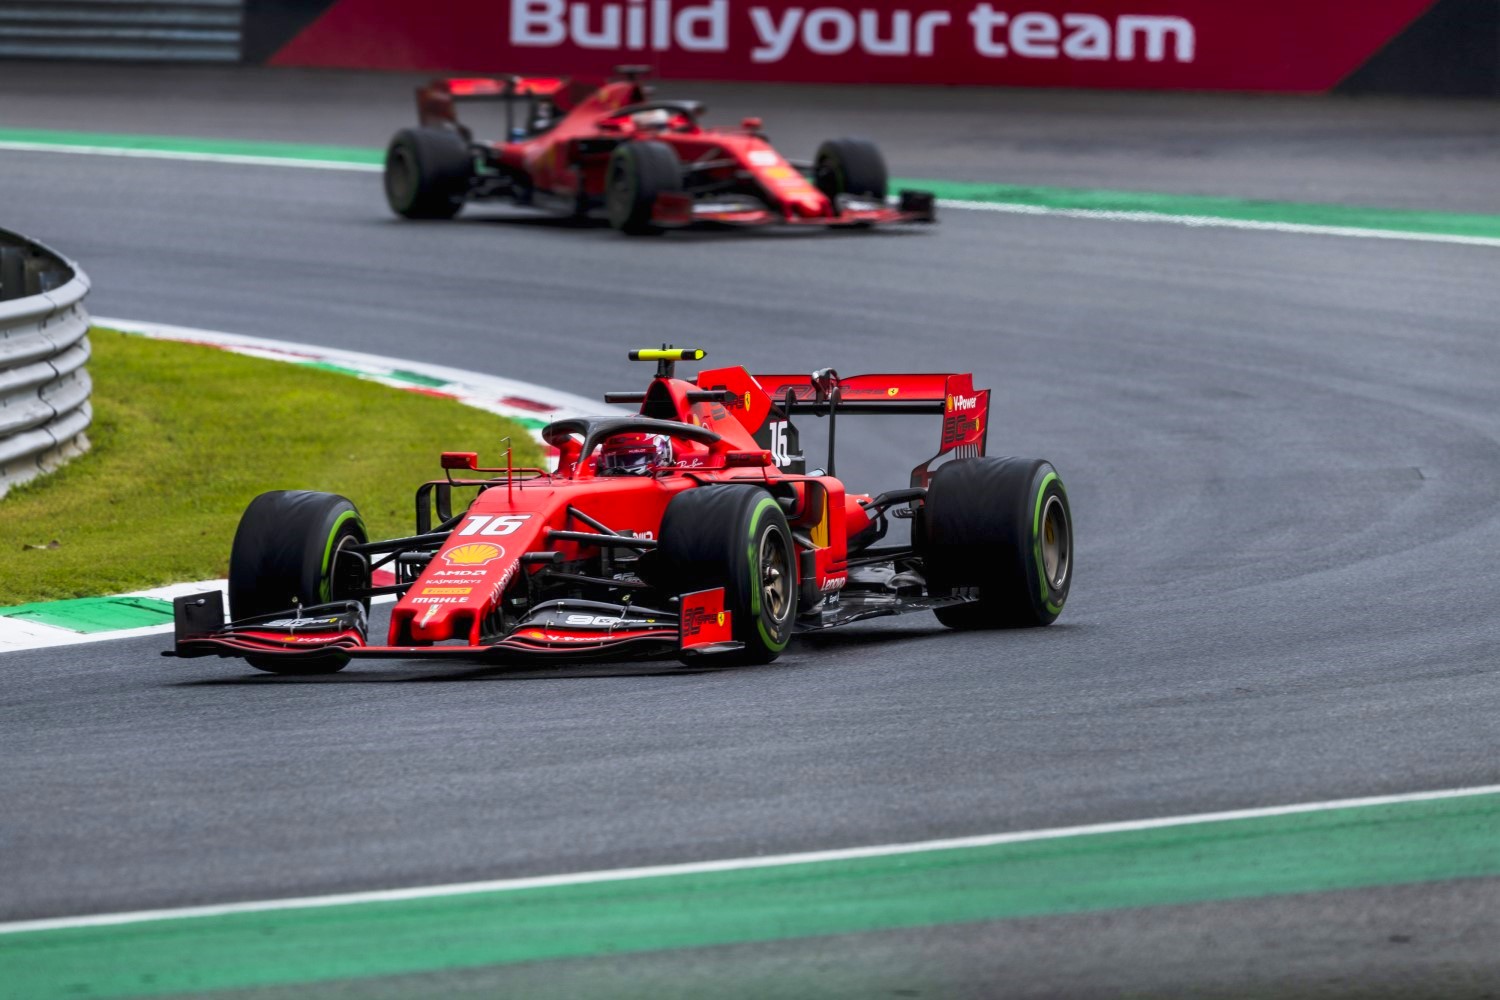 Leclerc screwed Vettel in qualifying. Vettel gave Leclerc a tow to set fast time in the first run, but stayed behind Vettel in the 2nd run until it was too late to cross the line before time ran out